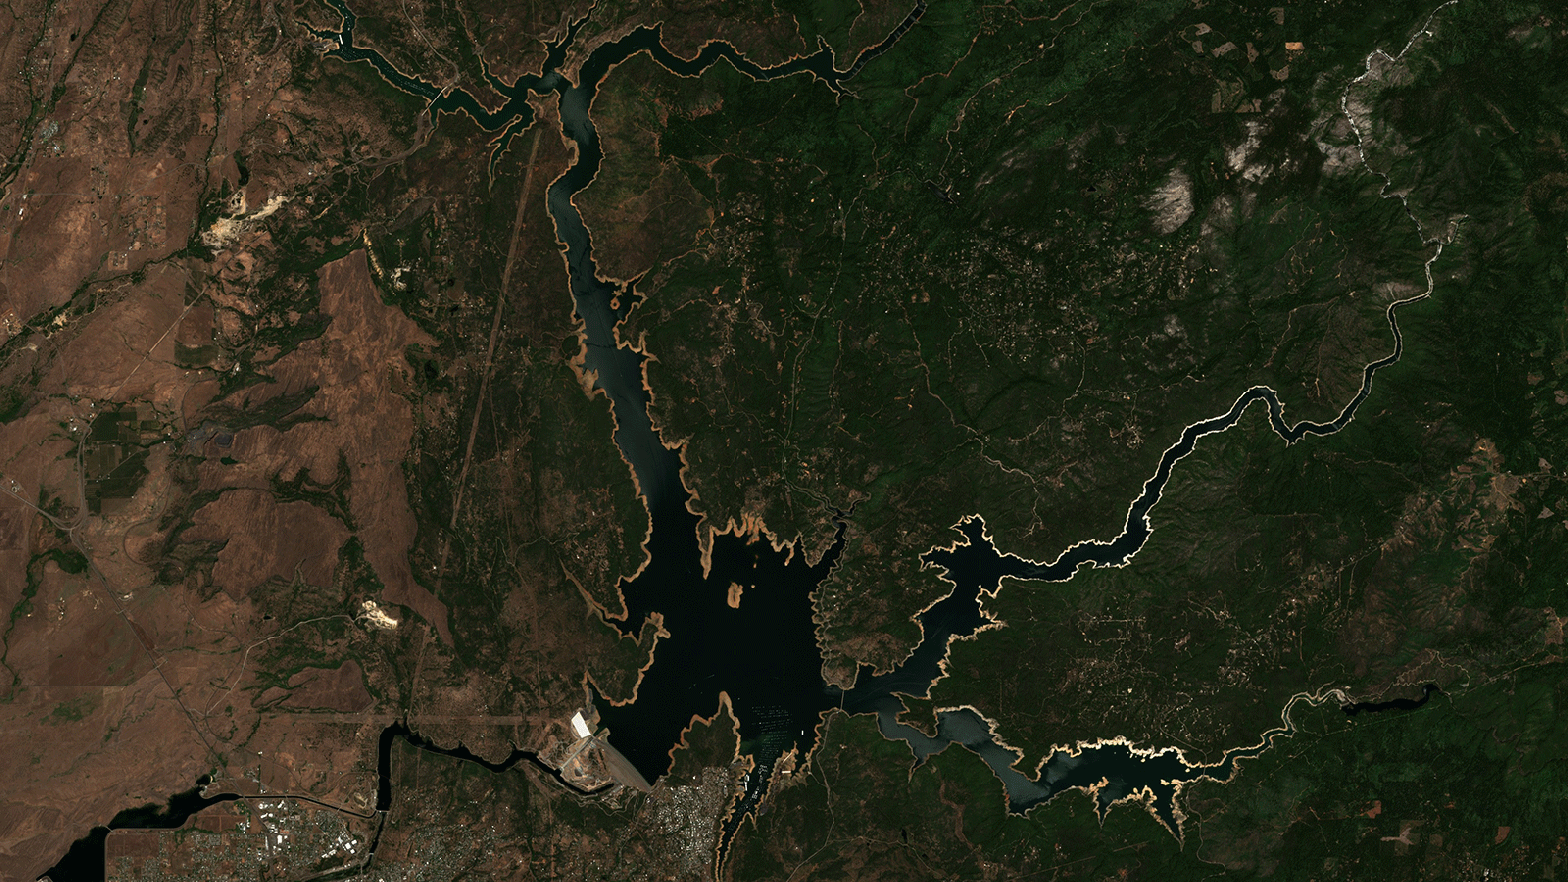 Lake Oroville on June 3, 2020 and June 8, 2021, illustrating lower reservoir levels and the parched landscape. (Gif: Brian Kahn/Sentinel Hub)